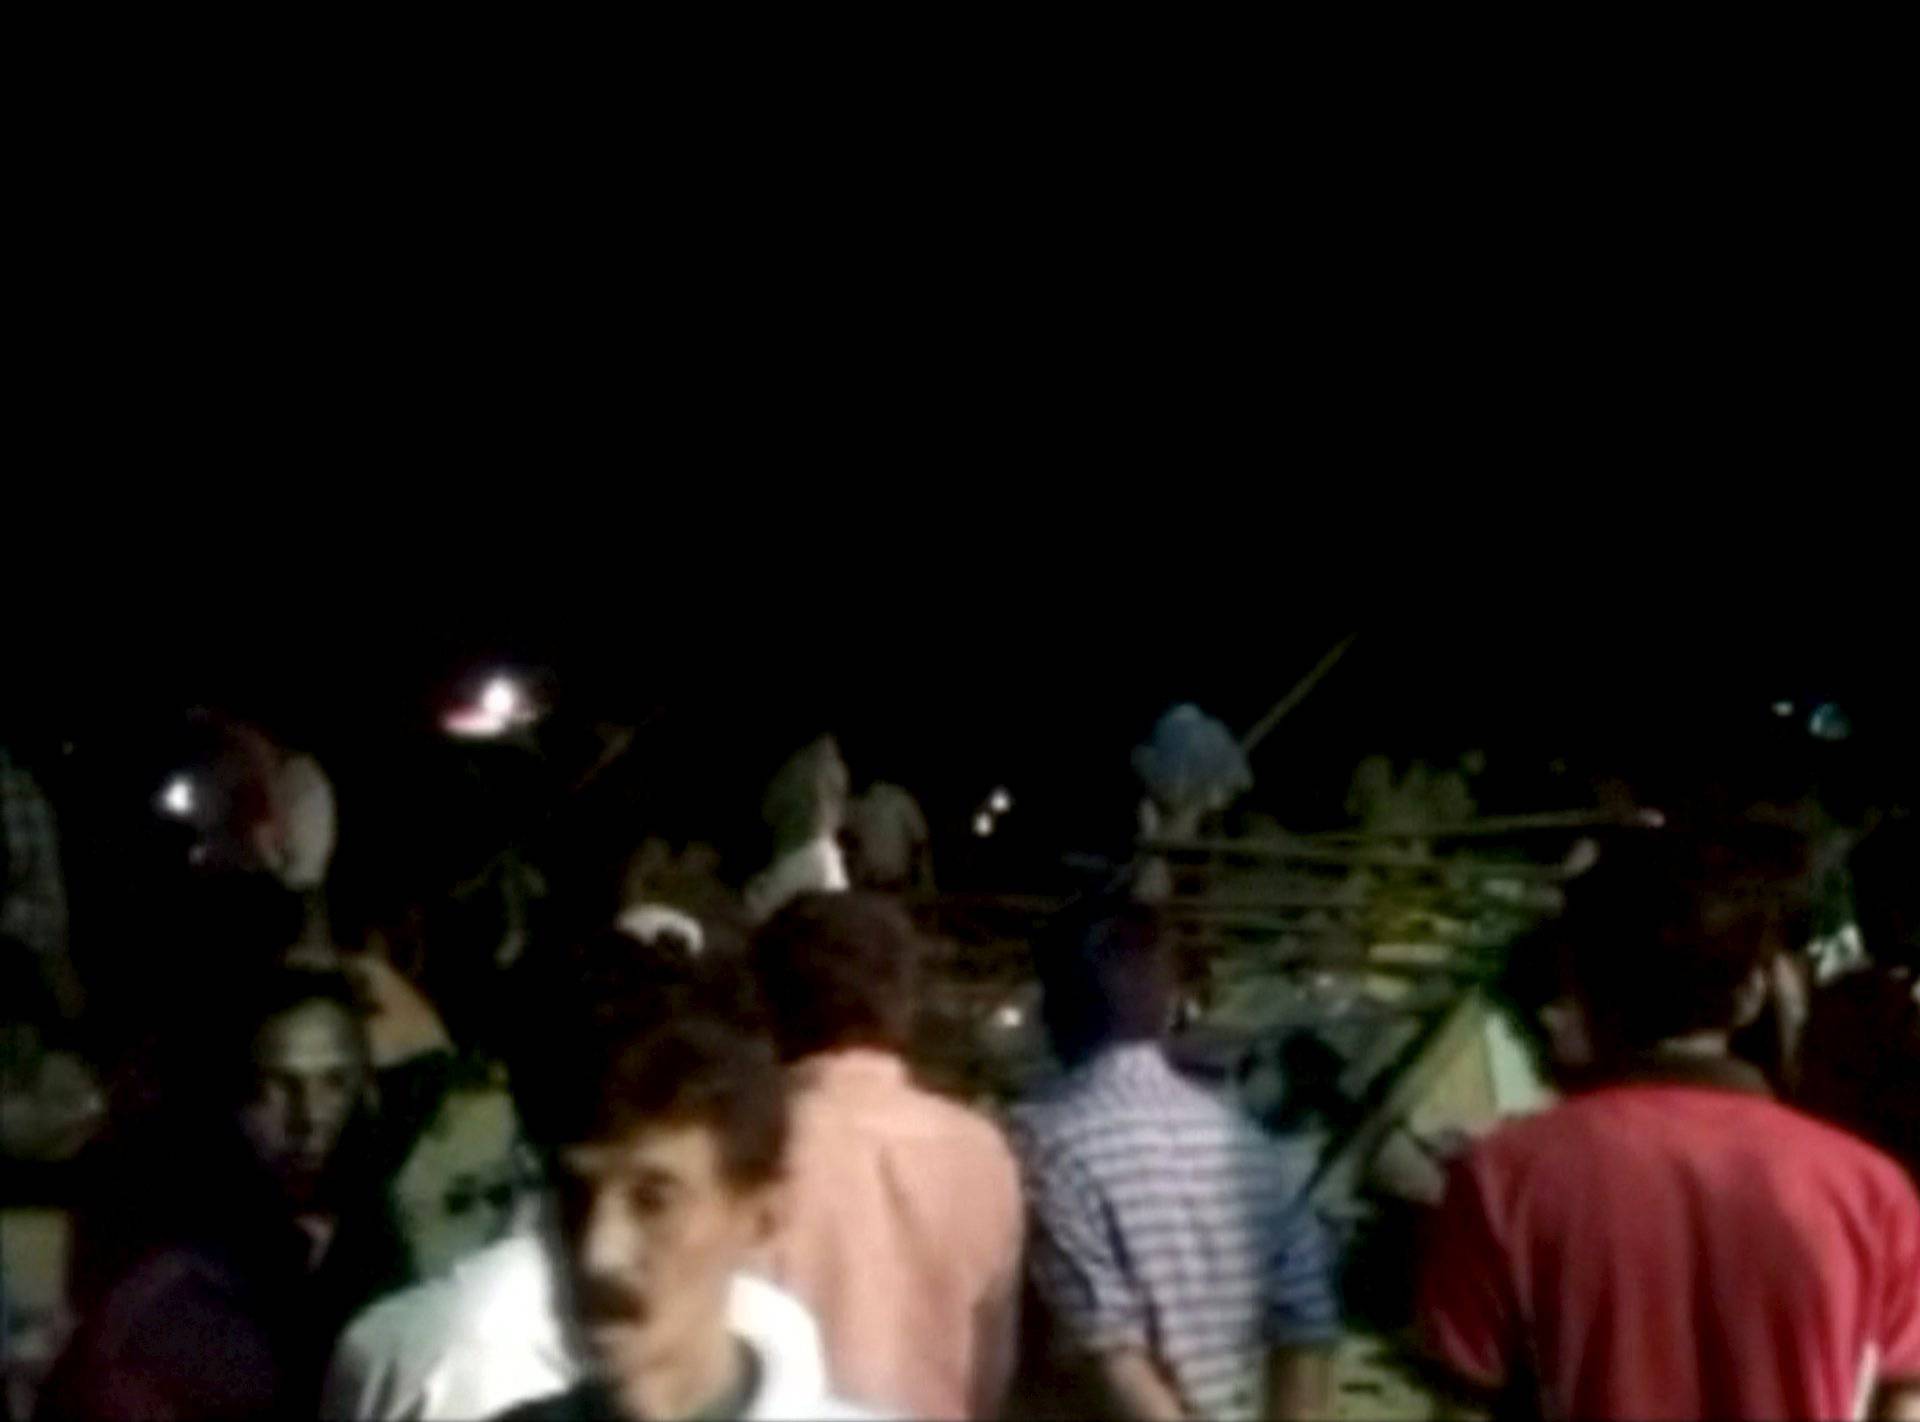 People gather at the debris of a temple where a fire broke out during a fireworks display in Kollam